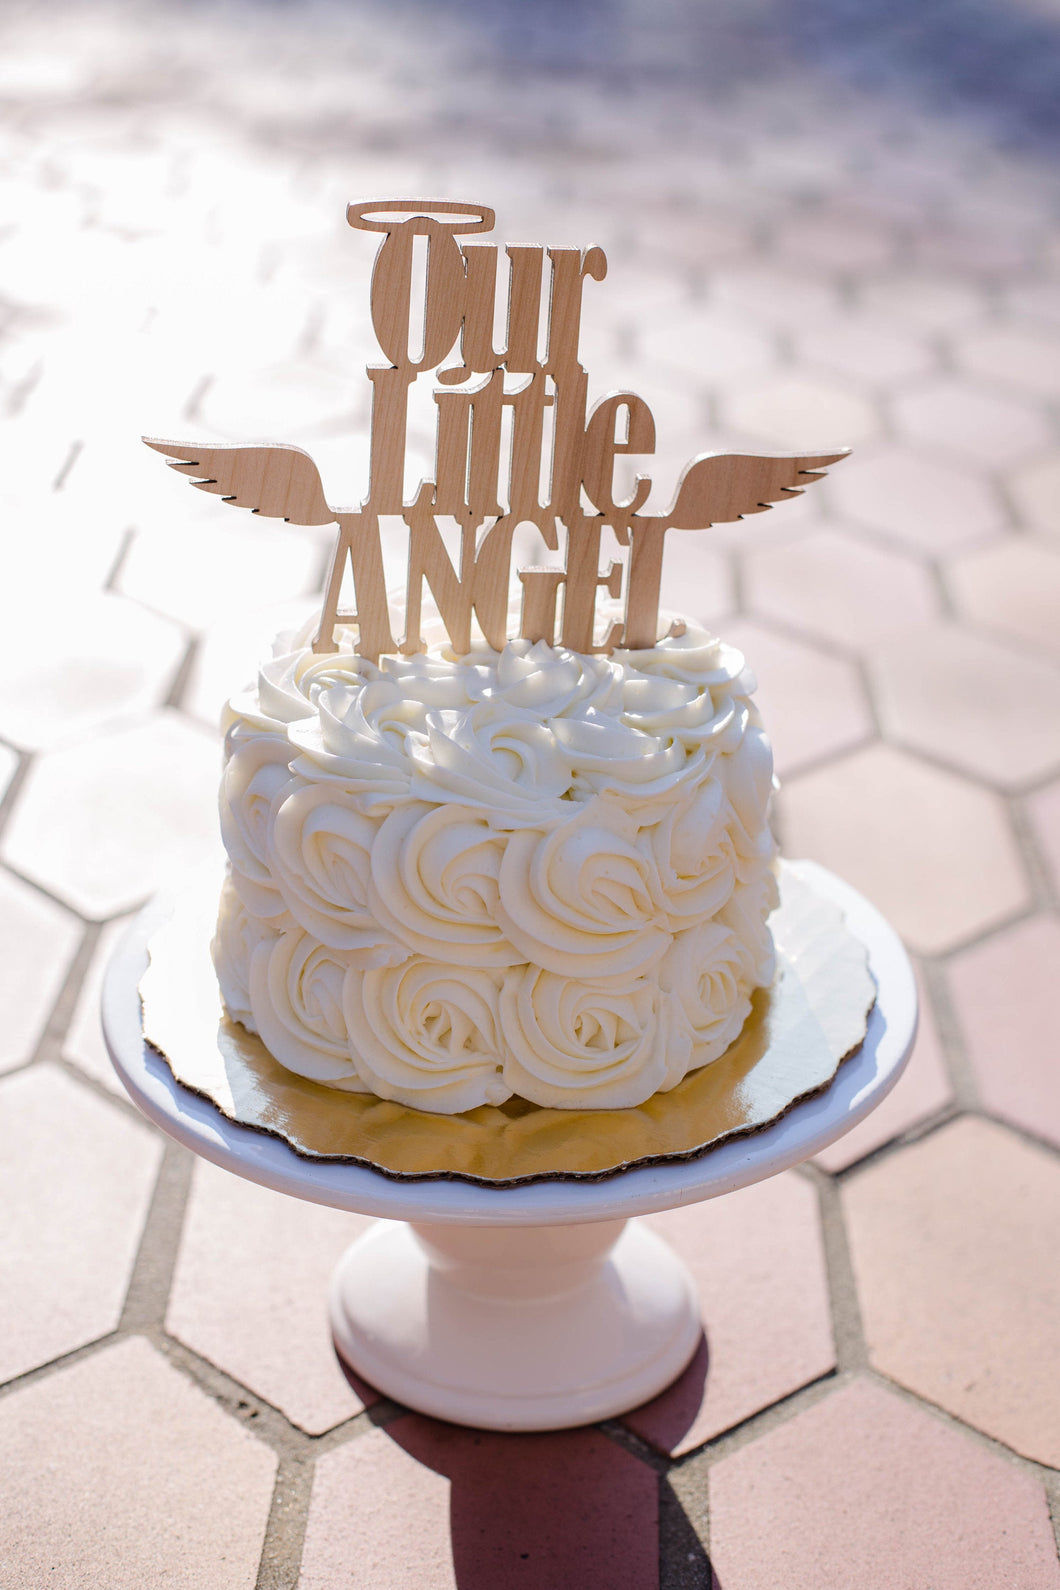 Our Little Angel Cake Topper